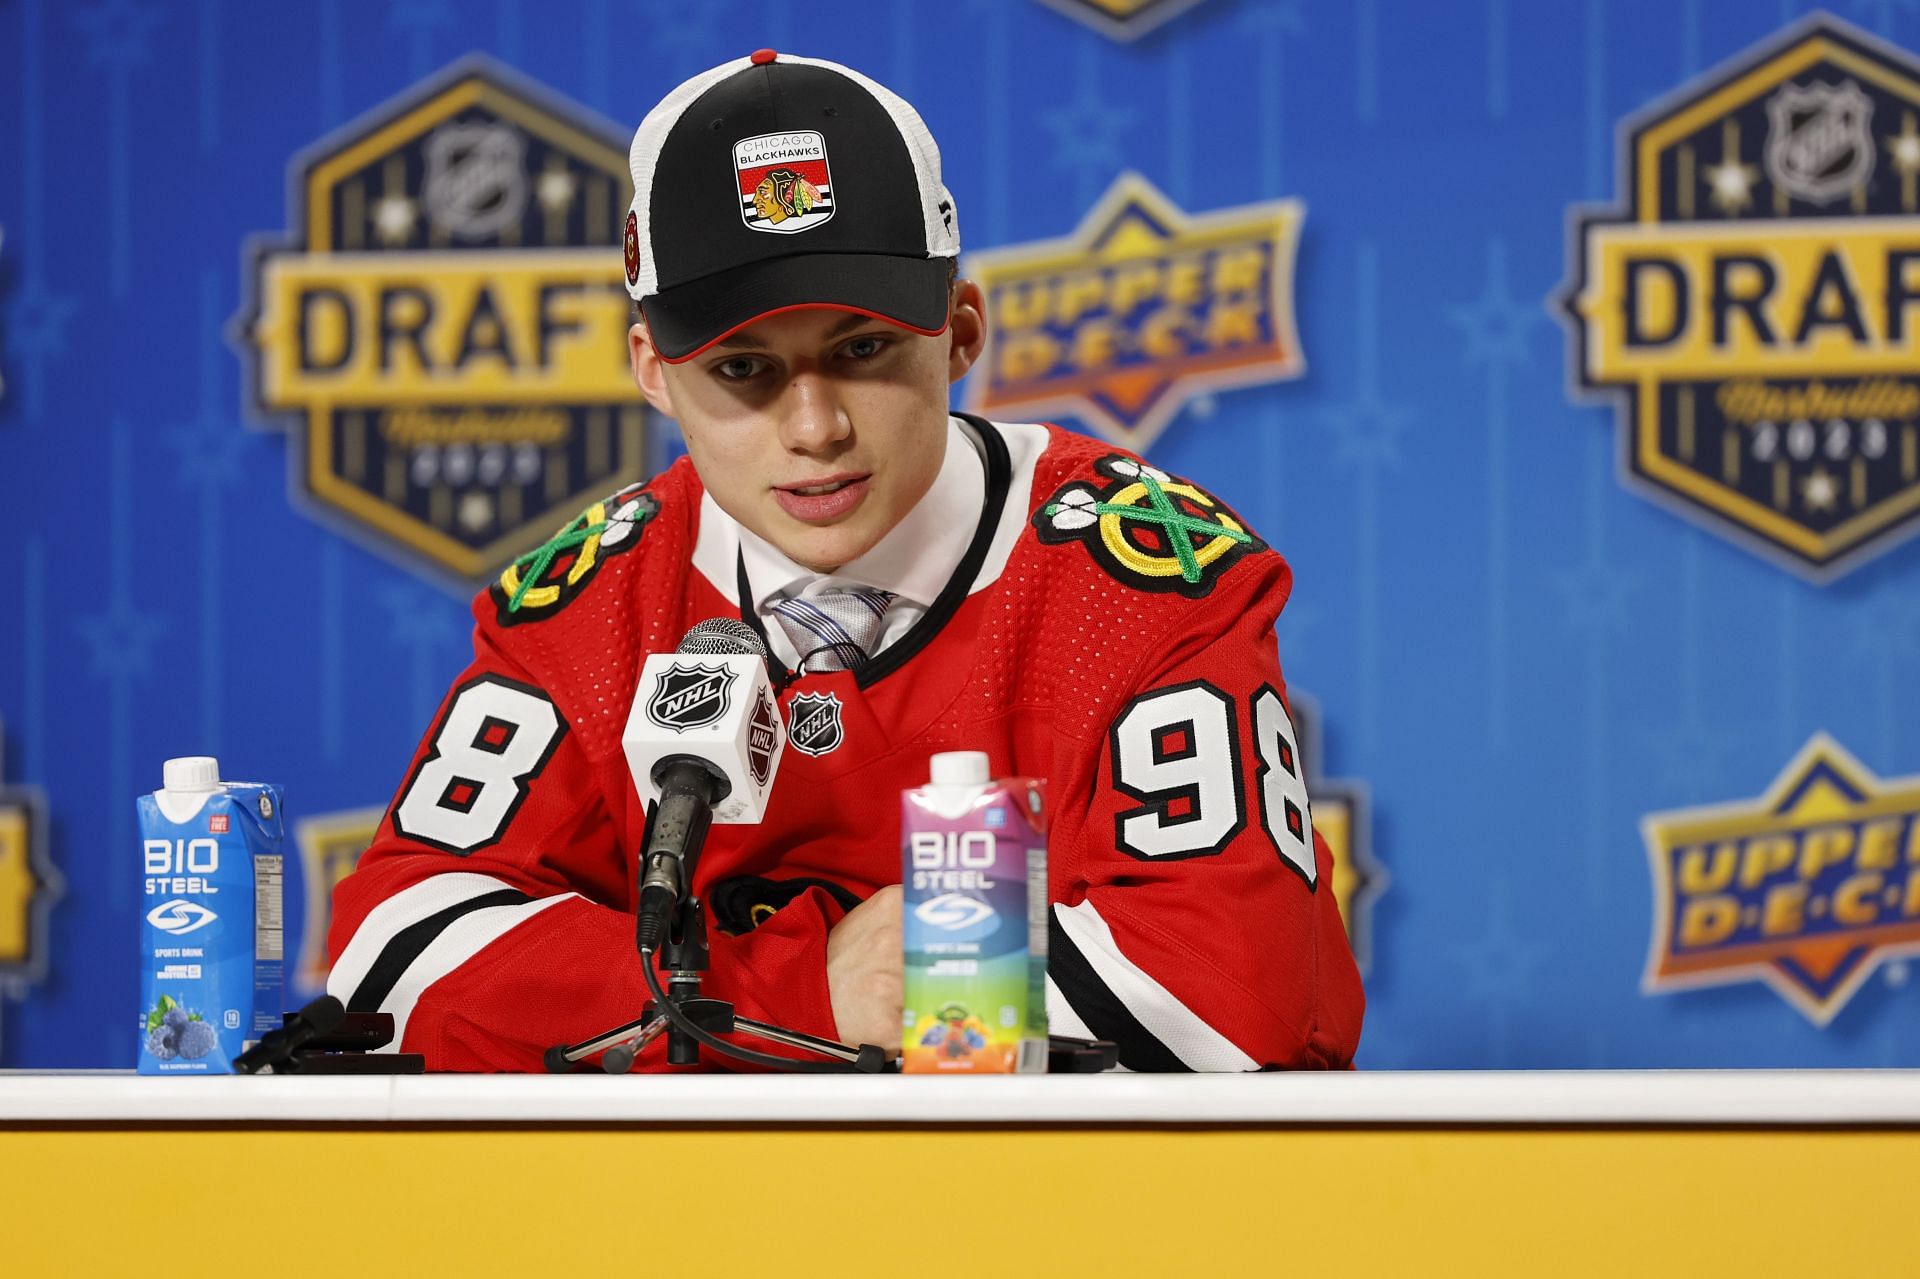 Connor Bedard signs entry-level contract with Blackhawks - ESPN